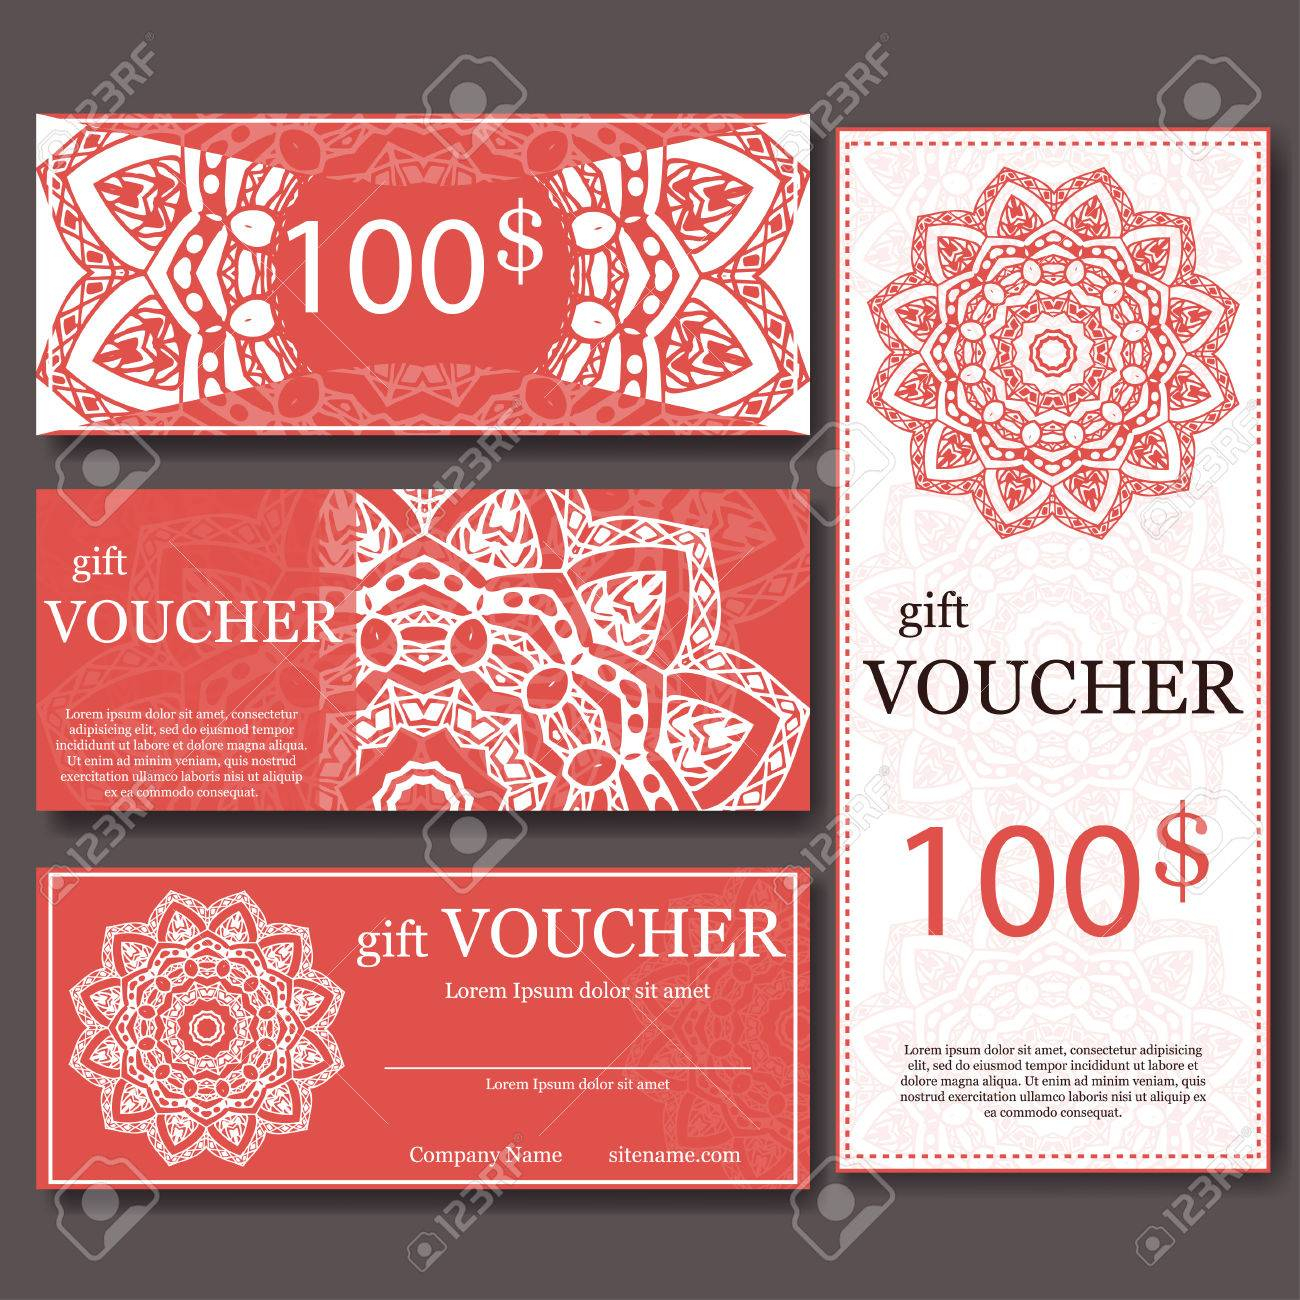 Gift Voucher Template With Mandala. Design Certificate For Sport.. With Yoga Gift Certificate Template Free